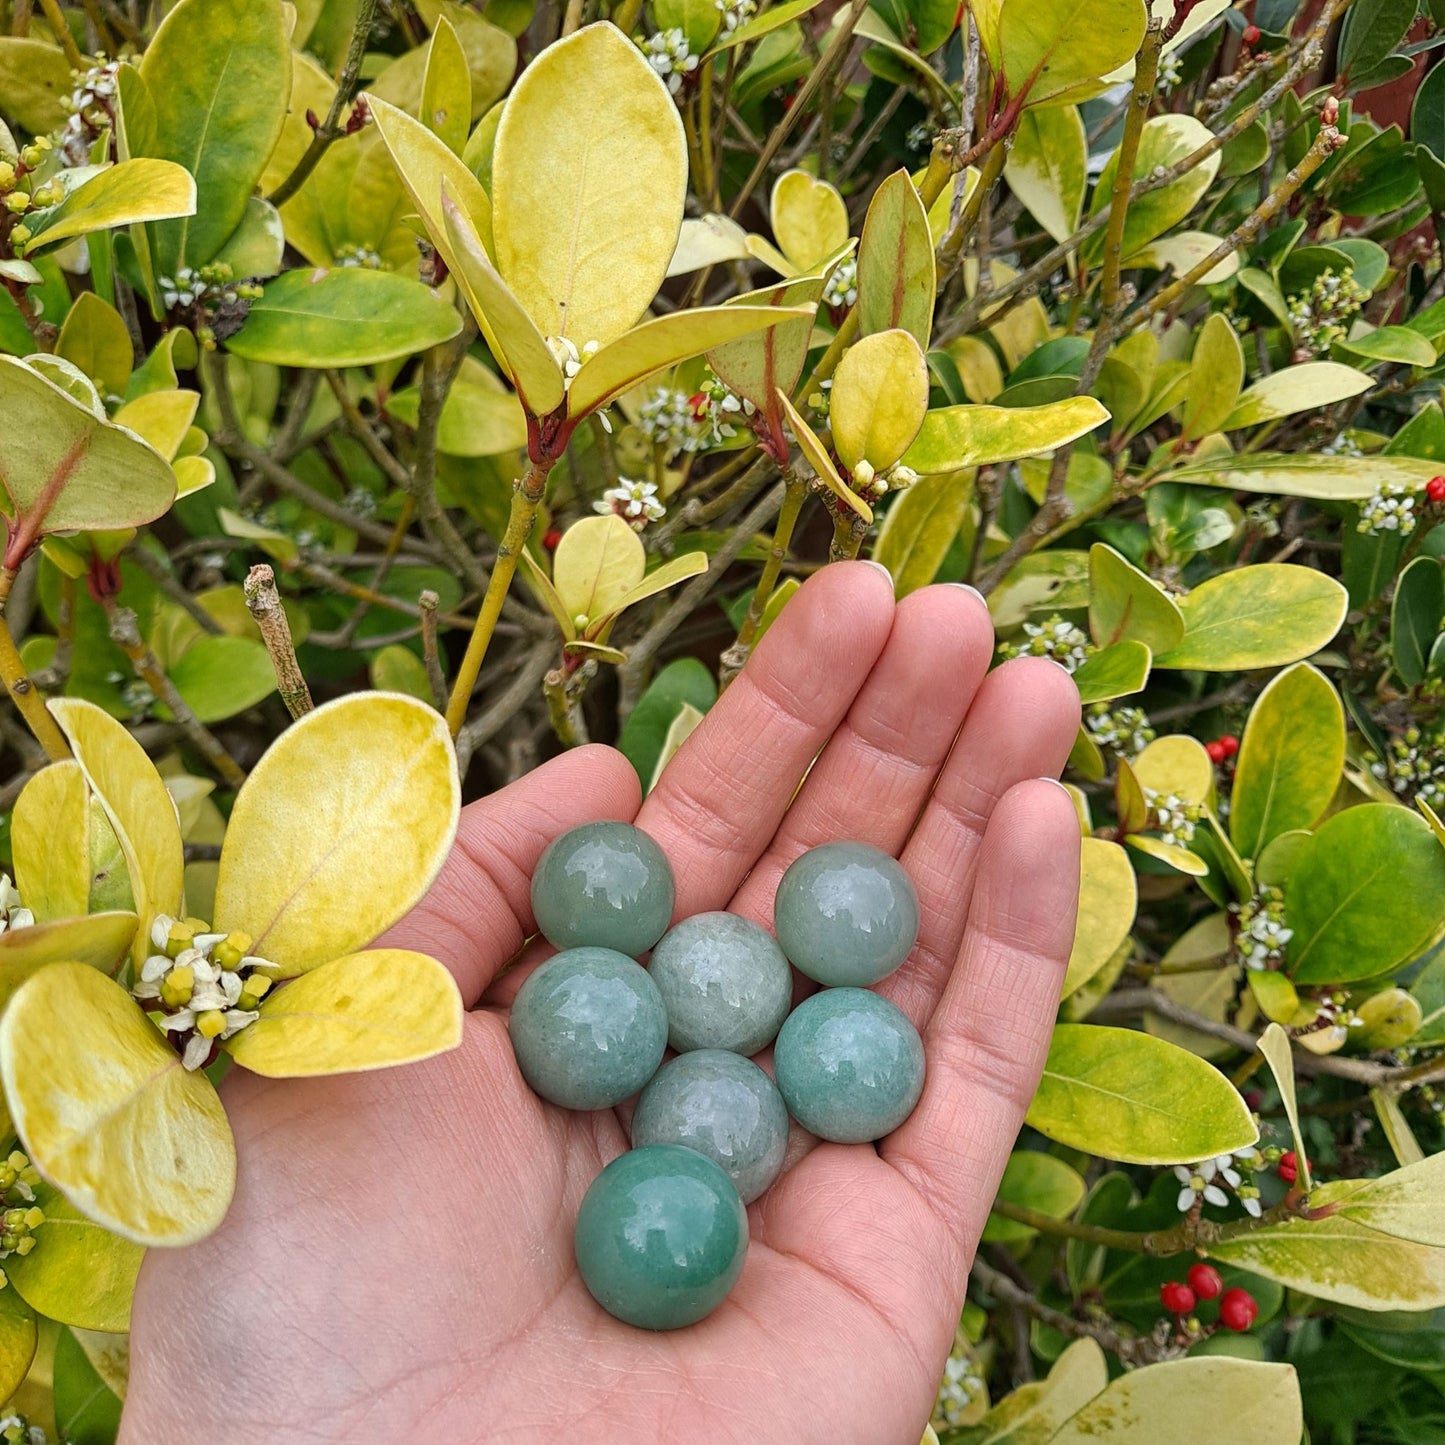 Dumi's Crystals | Green Aventurine Mini Spheres (20mm) | A collection of captivating Green Aventurine Mini Spheres, each displaying unique variations of vibrant green hues. These 20mm spheres are believed to promote peace, love, abundance, and emotional healing. Perfect for meditation, crystal grids, or carrying with you throughout the day.